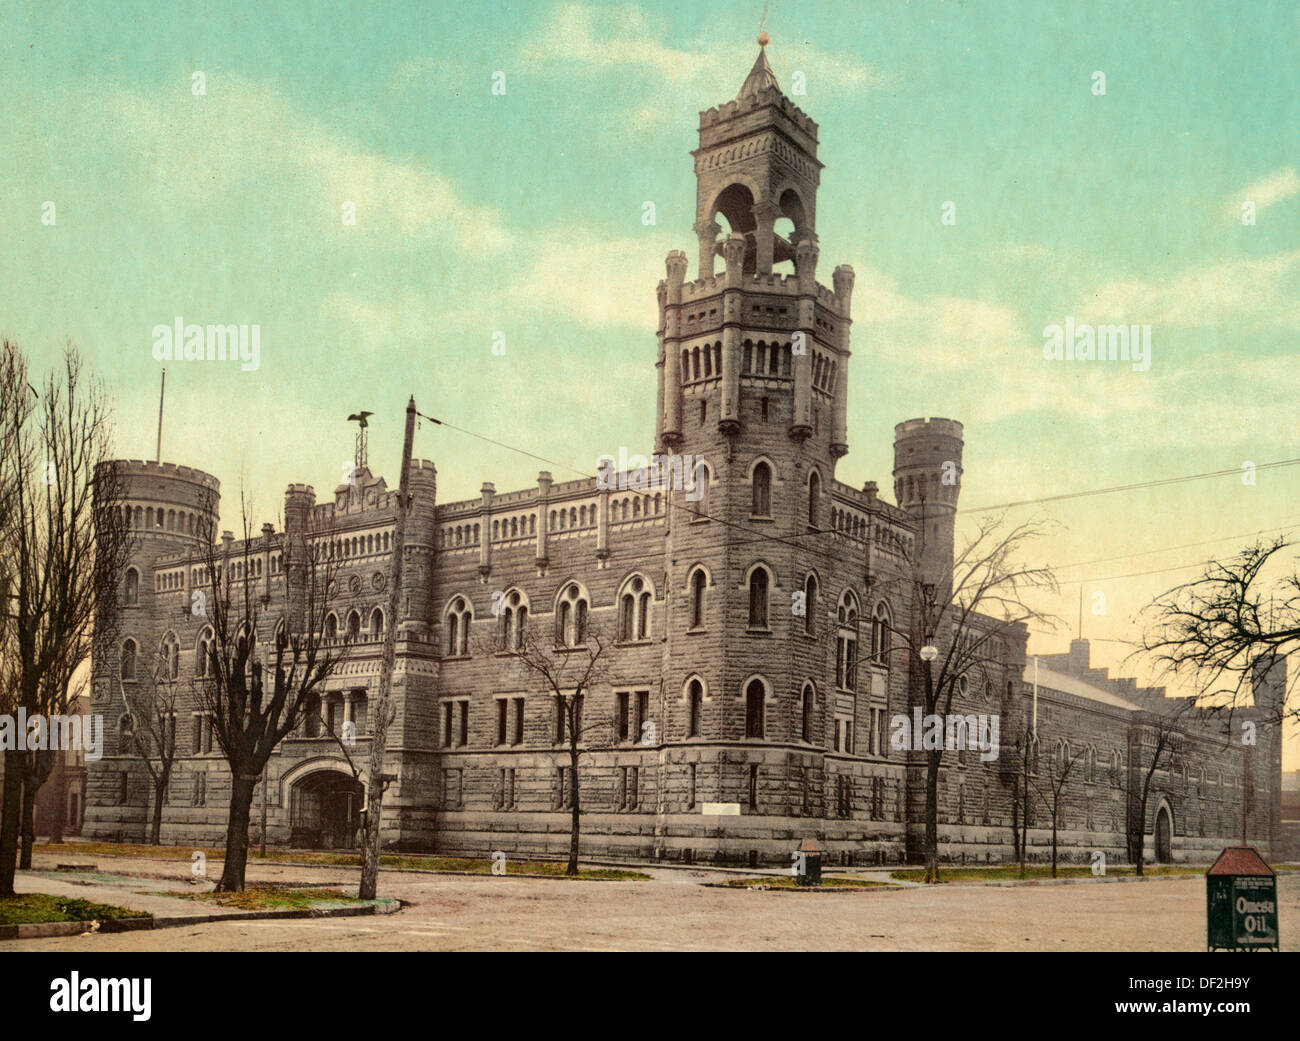 Armory of the Ohio National Guard, Cleveland, ca. 1901 Stockfoto